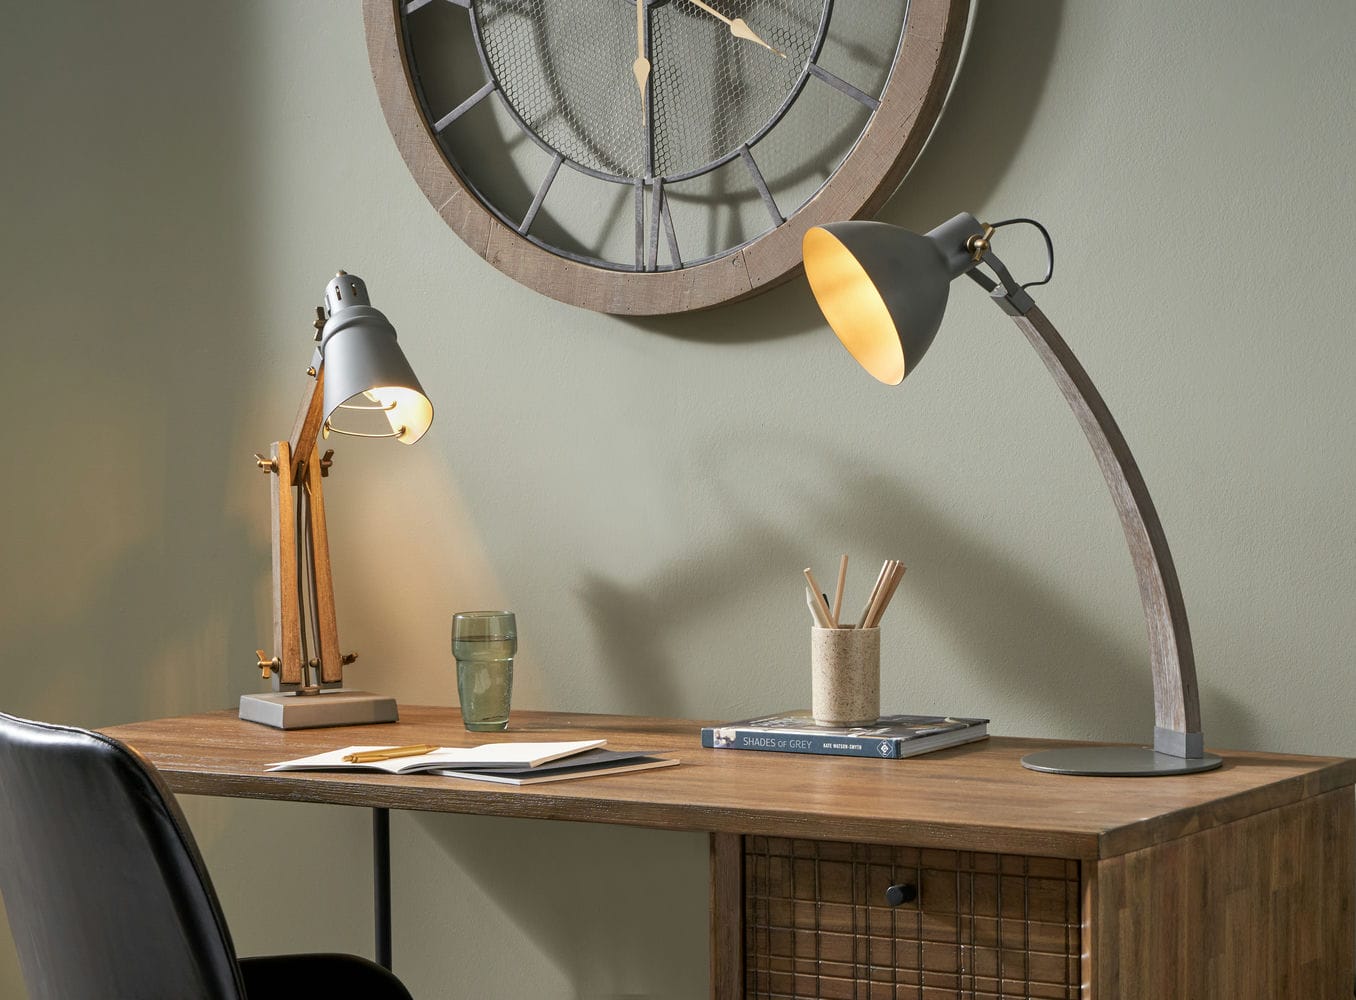 Topsham Wood and Grey Metal Curved Table Task Lamp